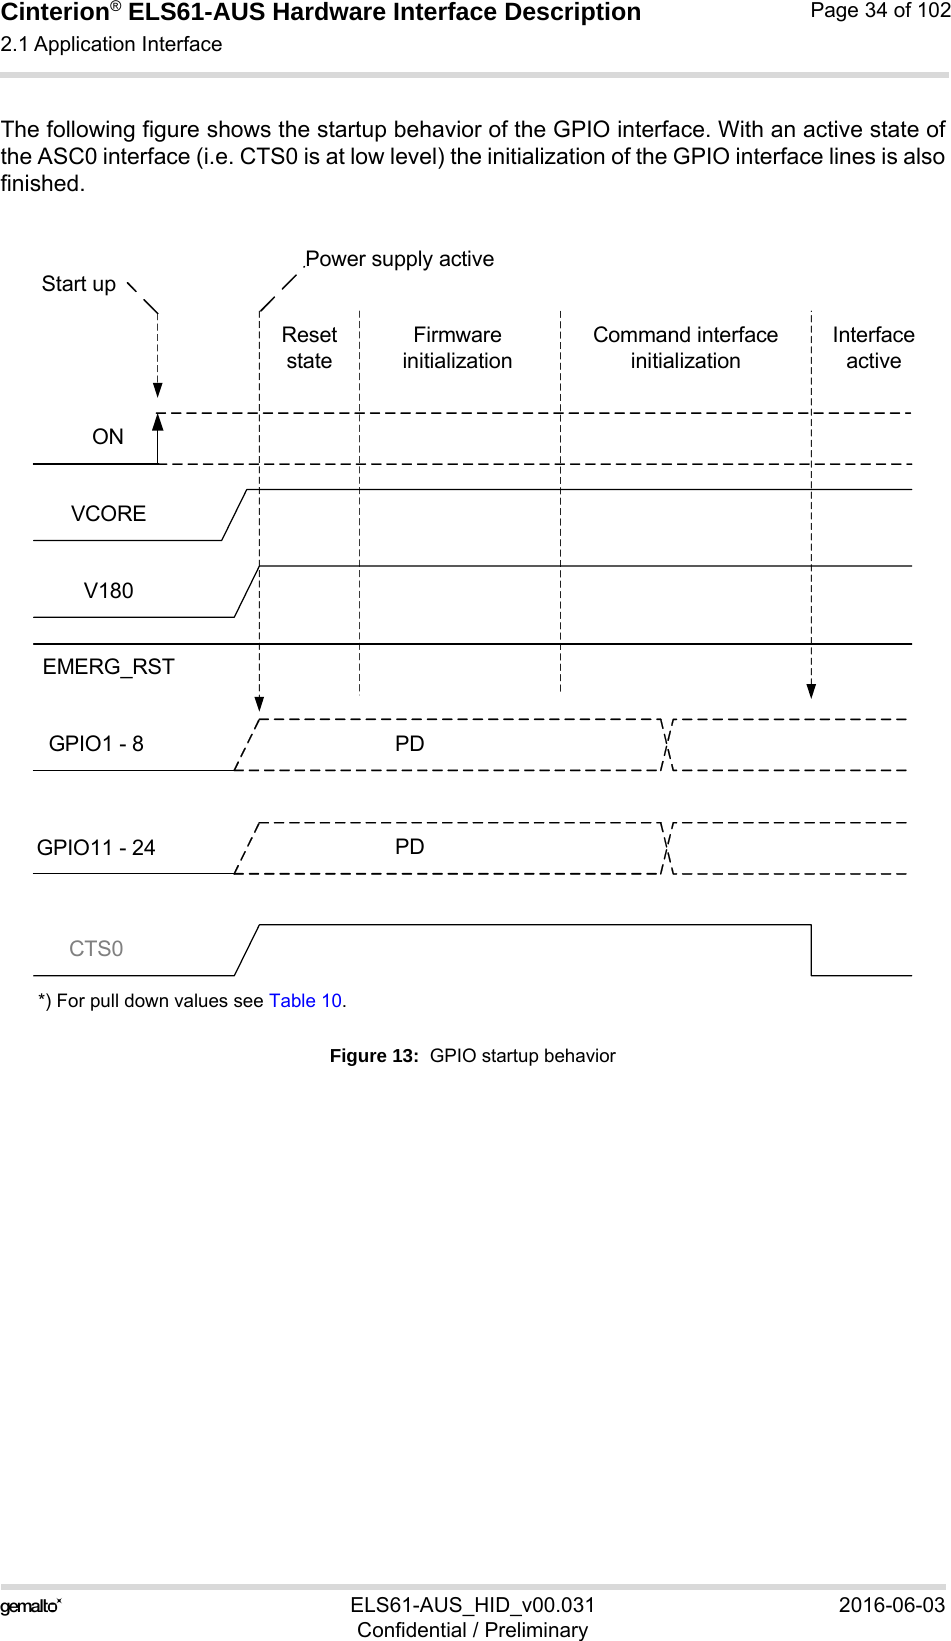 Cinterion® ELS61-AUS Hardware Interface Description2.1 Application Interface52ELS61-AUS_HID_v00.031 2016-06-03Confidential / PreliminaryPage 34 of 102The following figure shows the startup behavior of the GPIO interface. With an active state ofthe ASC0 interface (i.e. CTS0 is at low level) the initialization of the GPIO interface lines is alsofinished.*) For pull down values see Table 10.Figure 13:  GPIO startup behaviorGPIO1 - 8 PDCTS0ONEMERG_RSTPower supply activeStart upFirmware initializationCommand interface initializationInterface activeResetstateV180VCOREGPIO11 - 24 PD